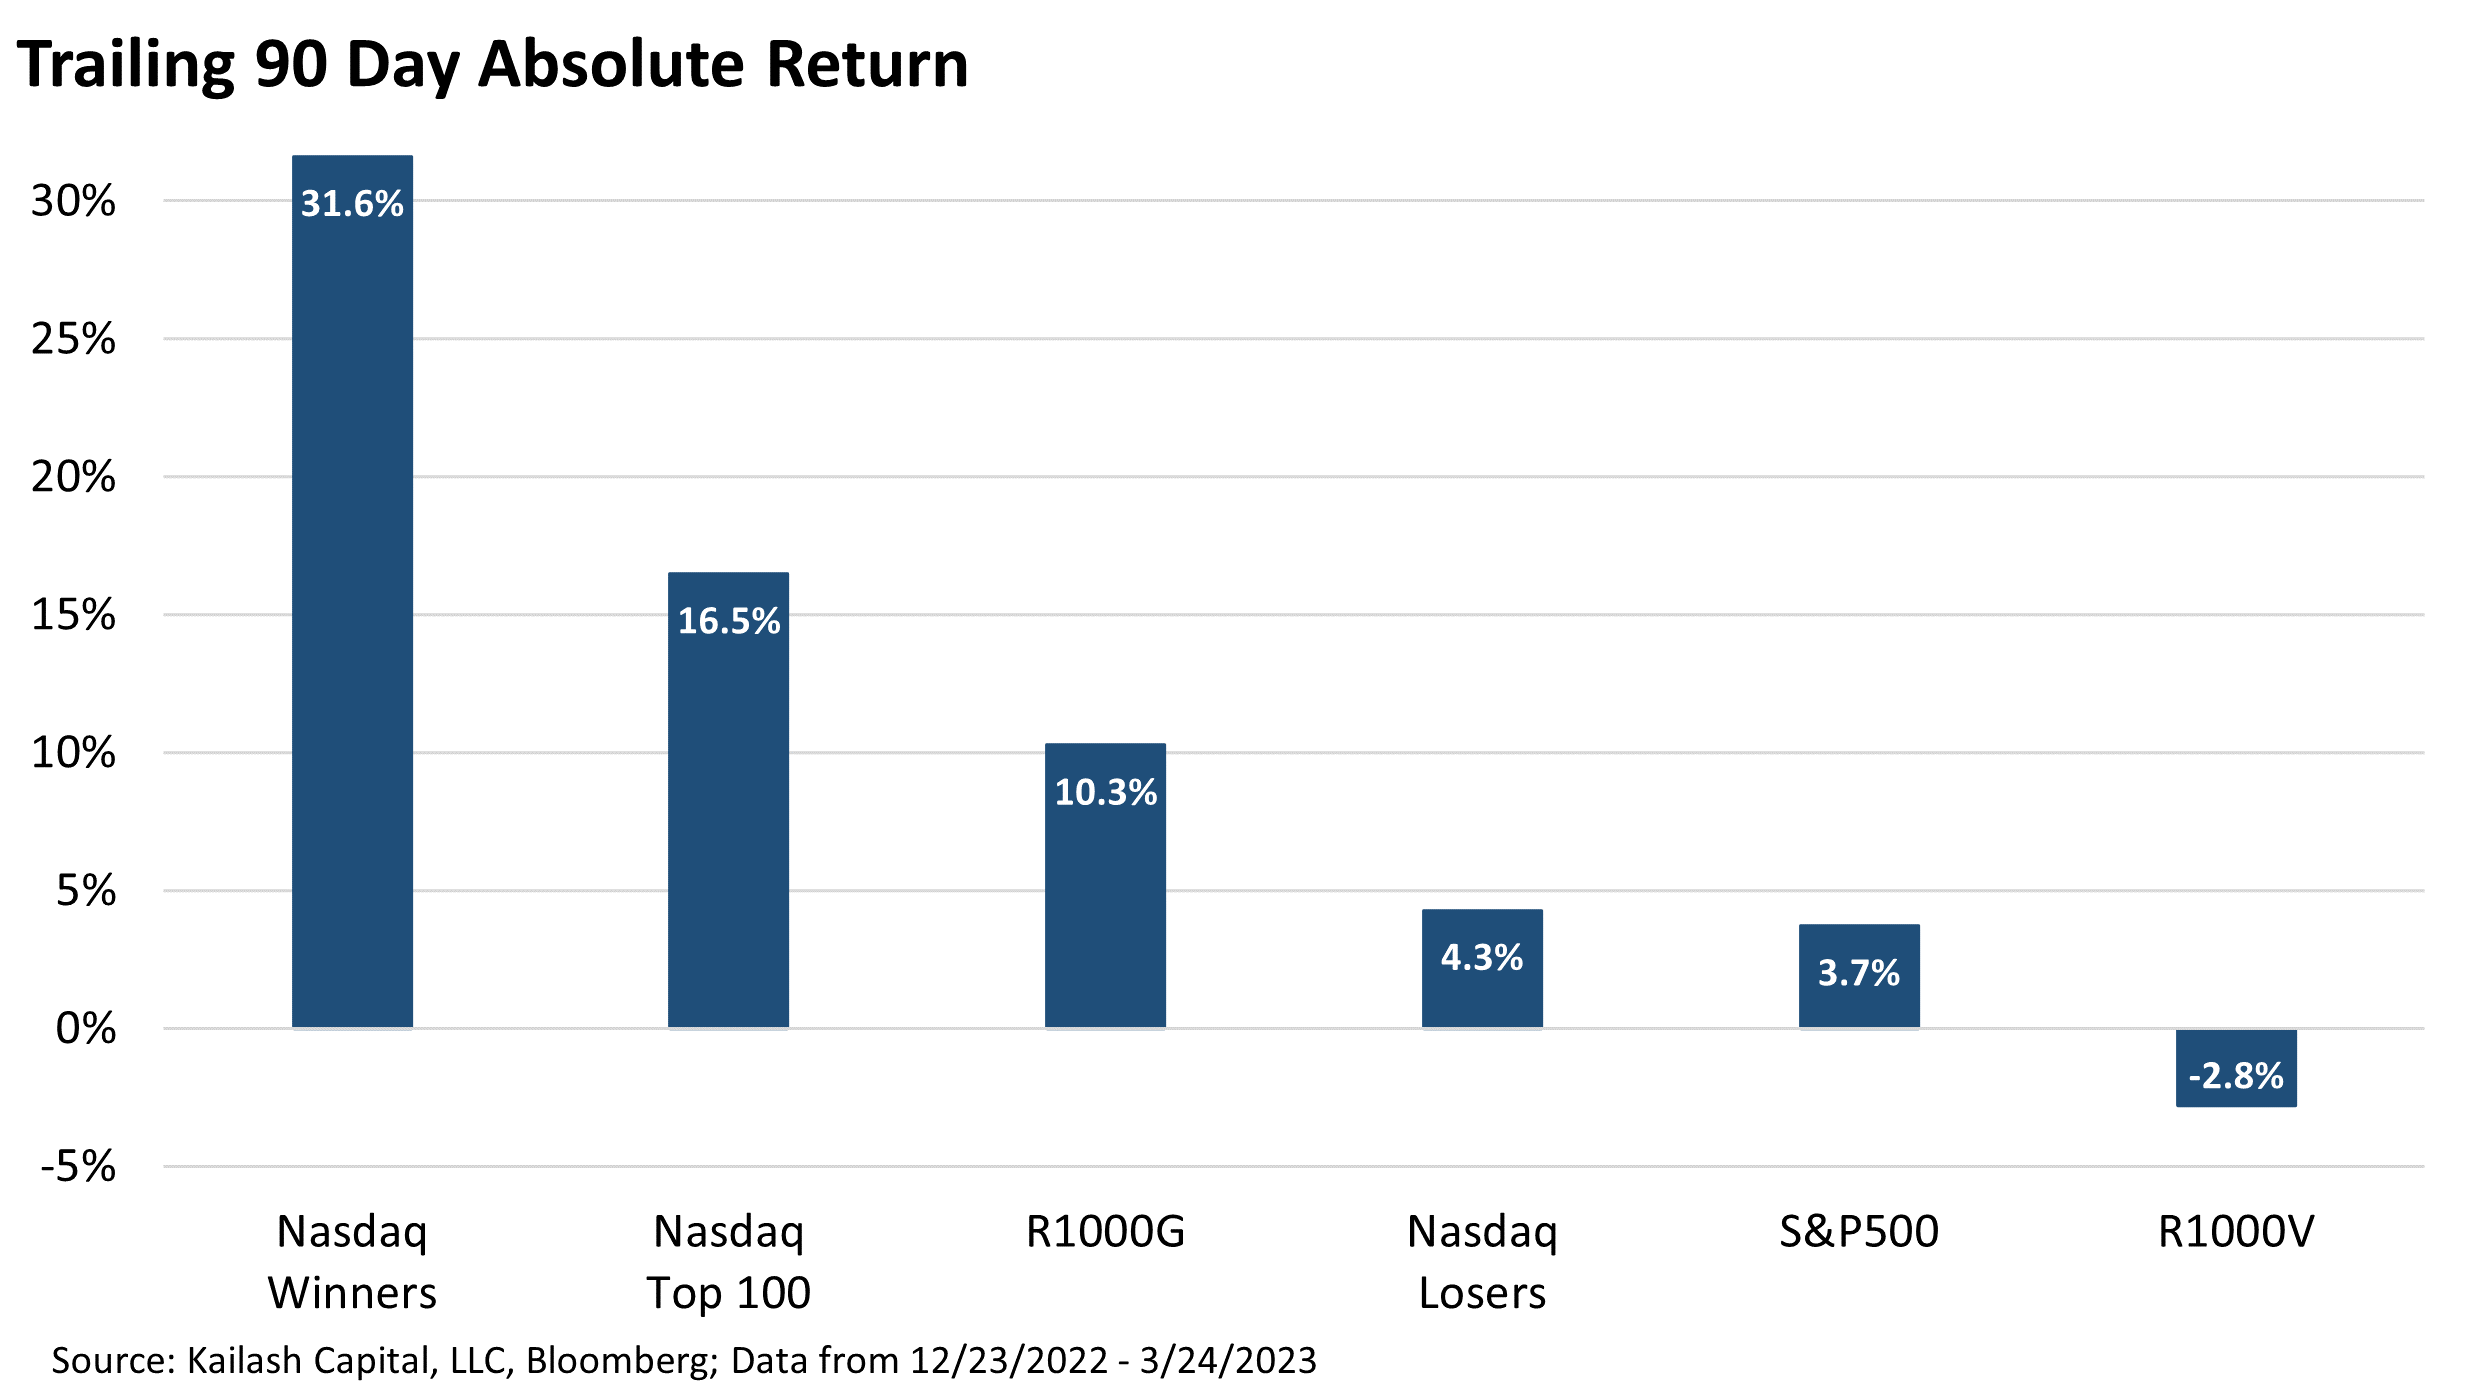 Trailing 90 Day Absolute Return